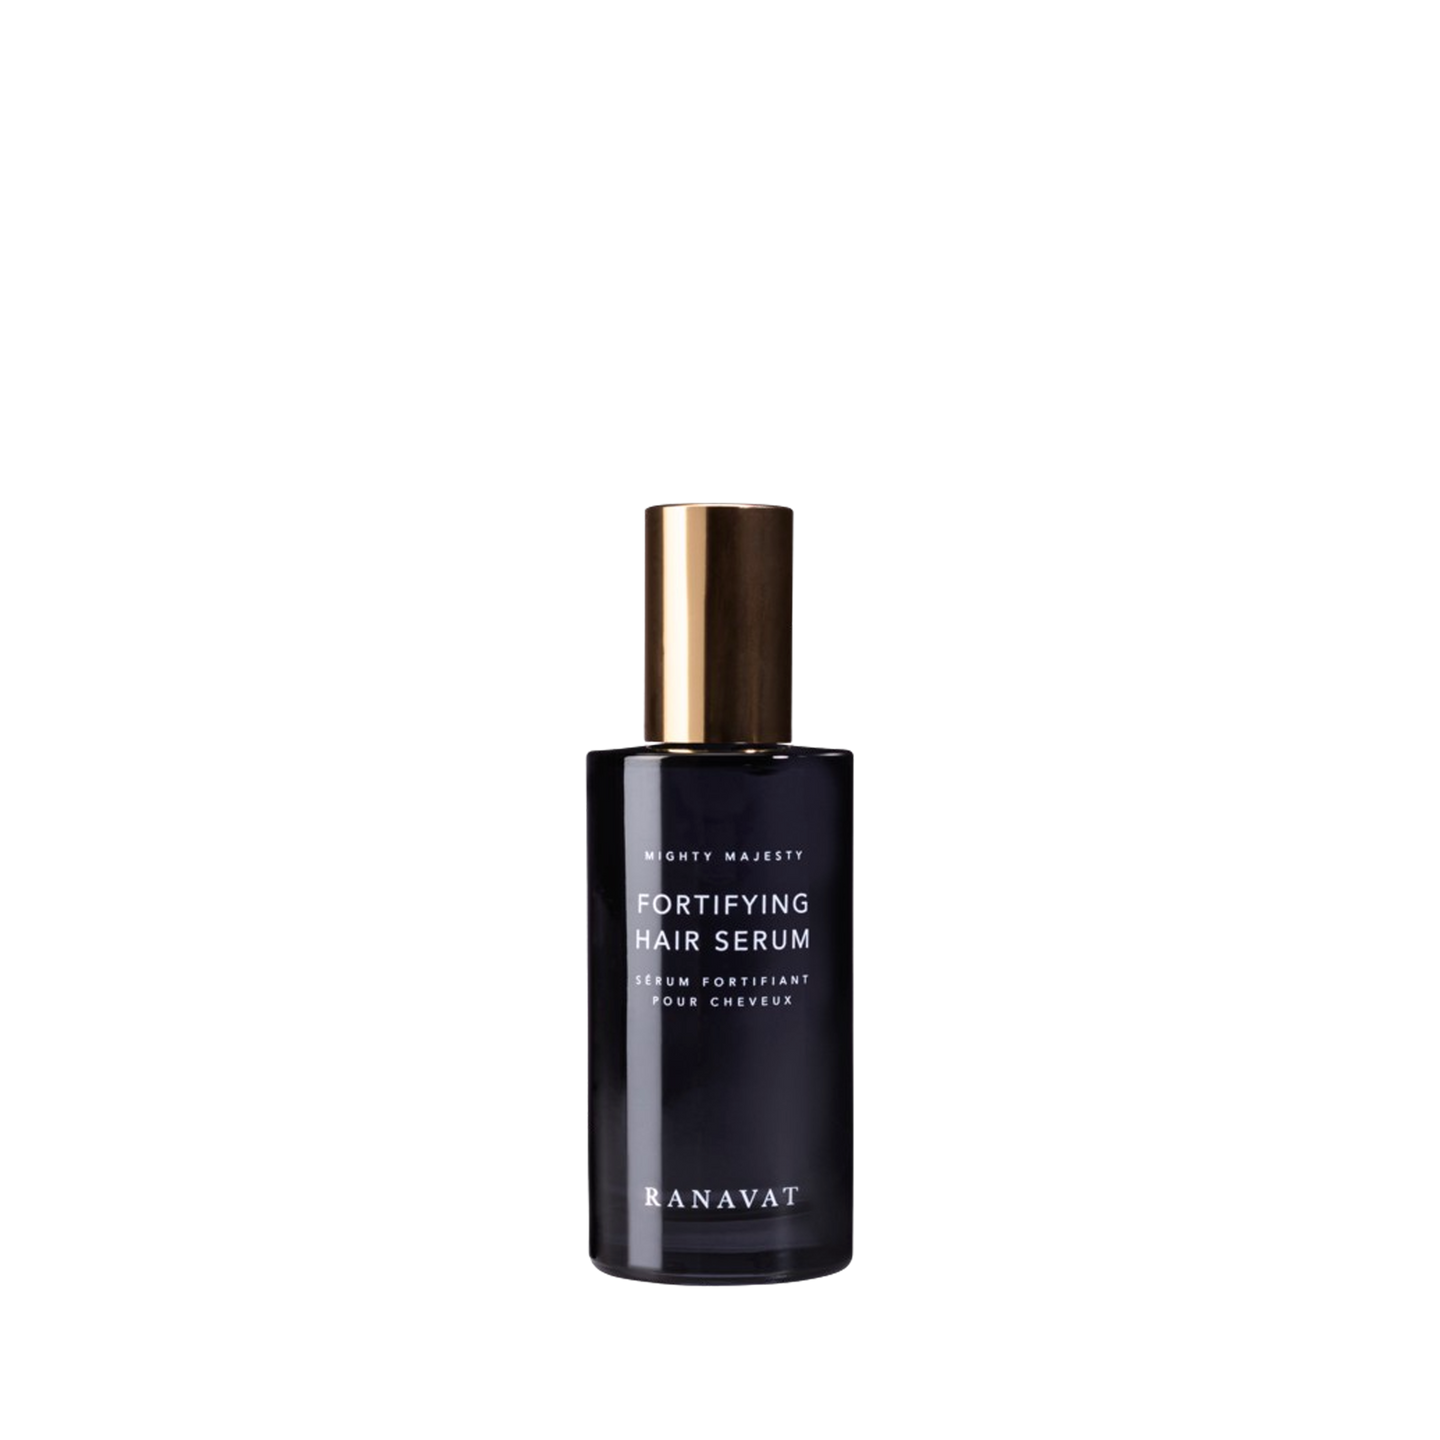 MIGHTY MAJESTY Fortifying Hair Serum